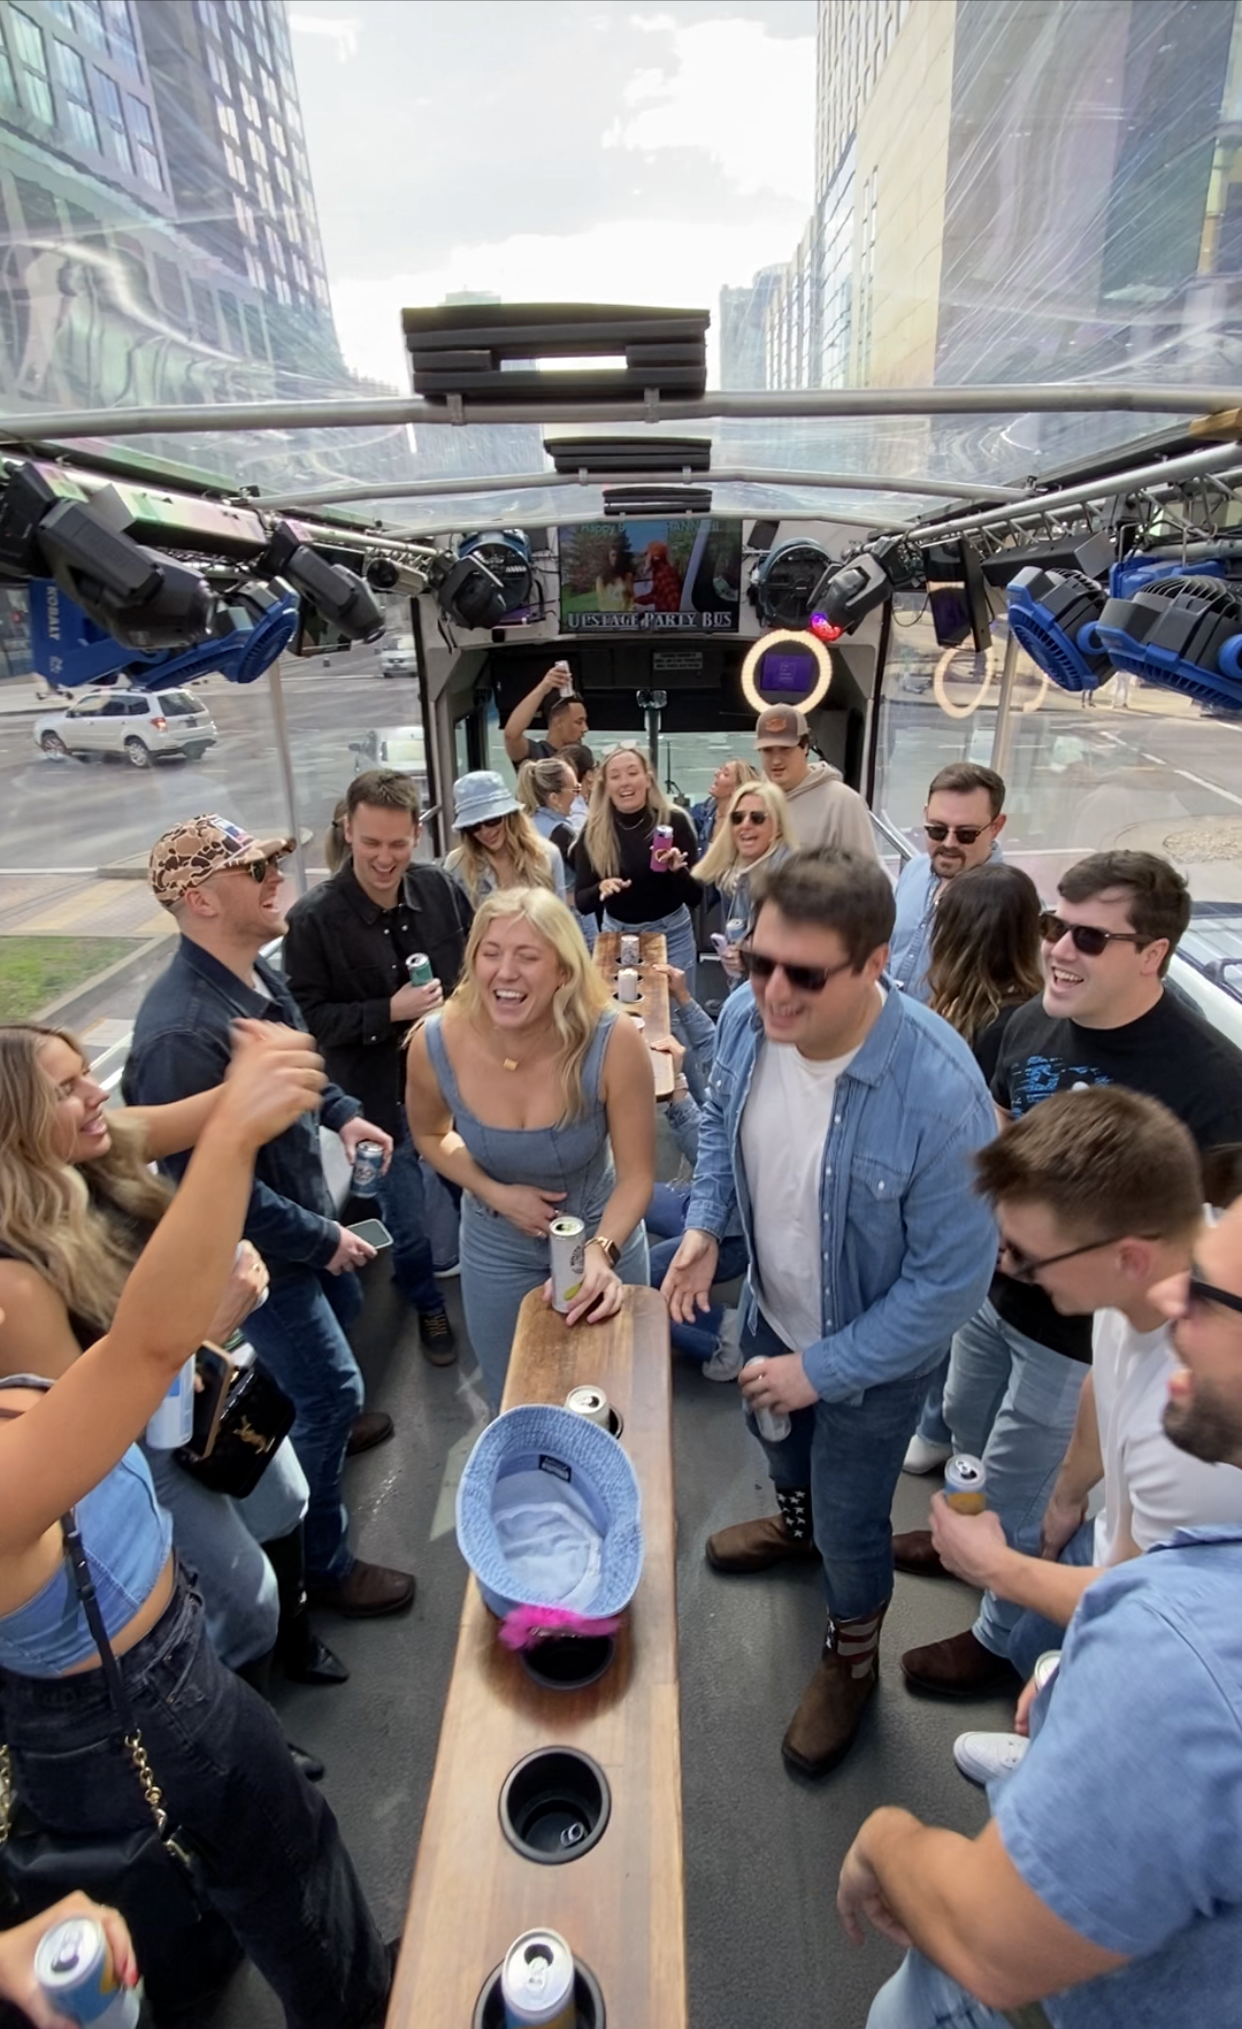 Party Bus Tour in Winter in Nashville, TN